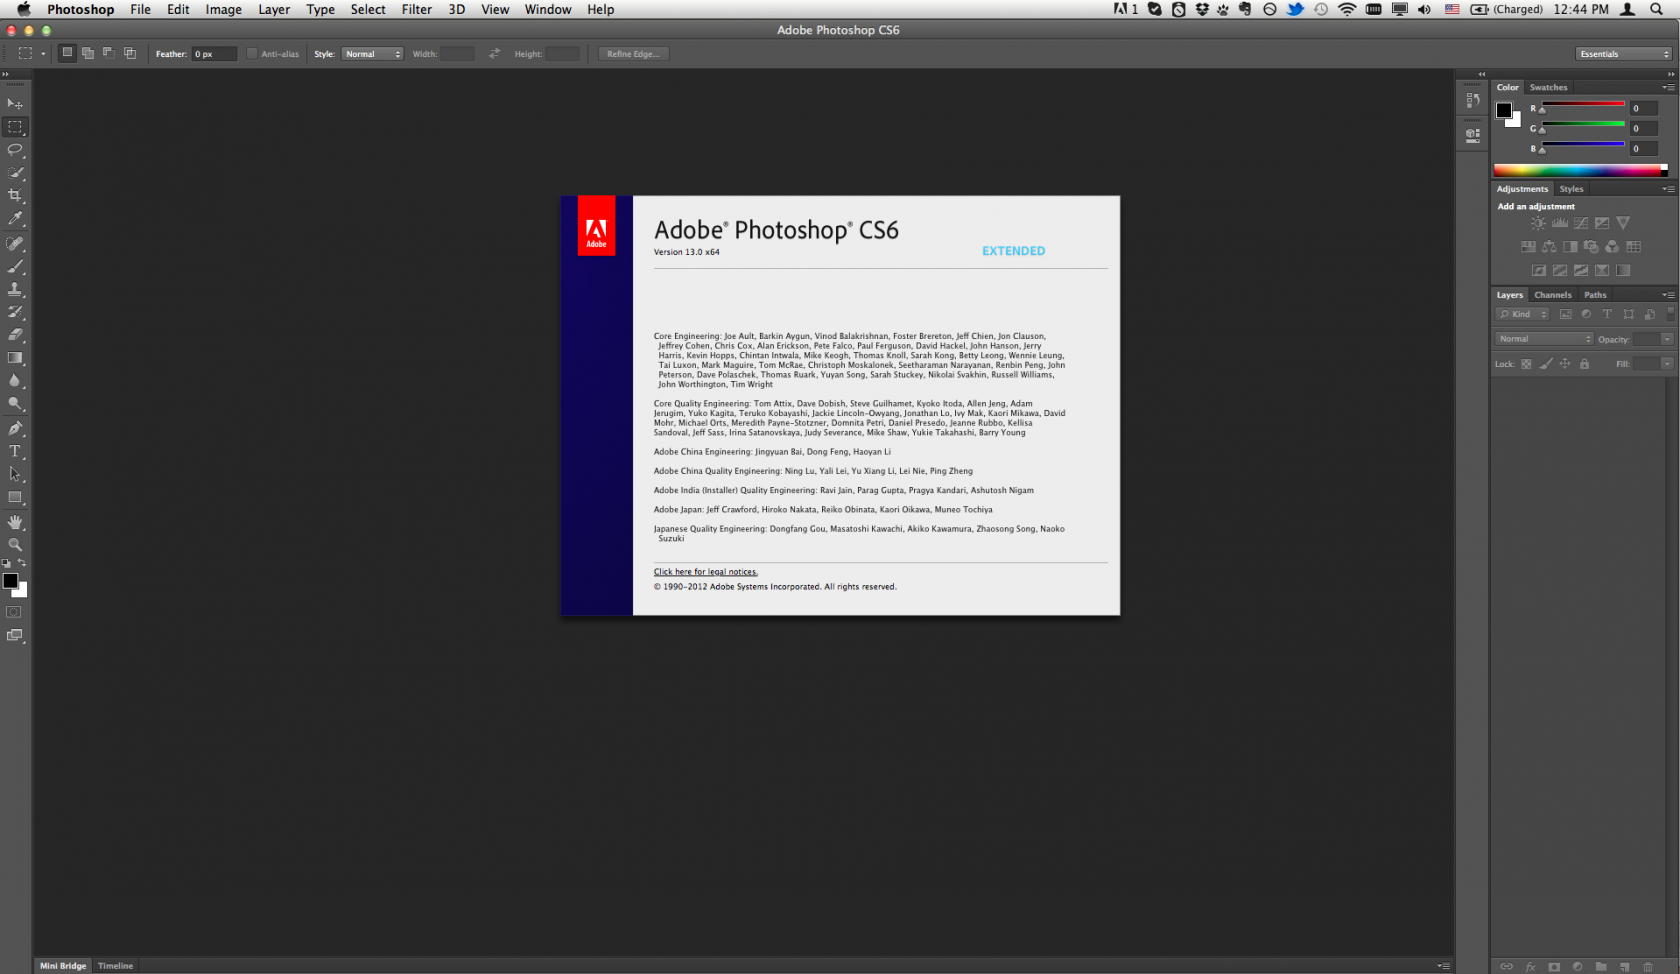 adobe photoshop cs6 extended version free download